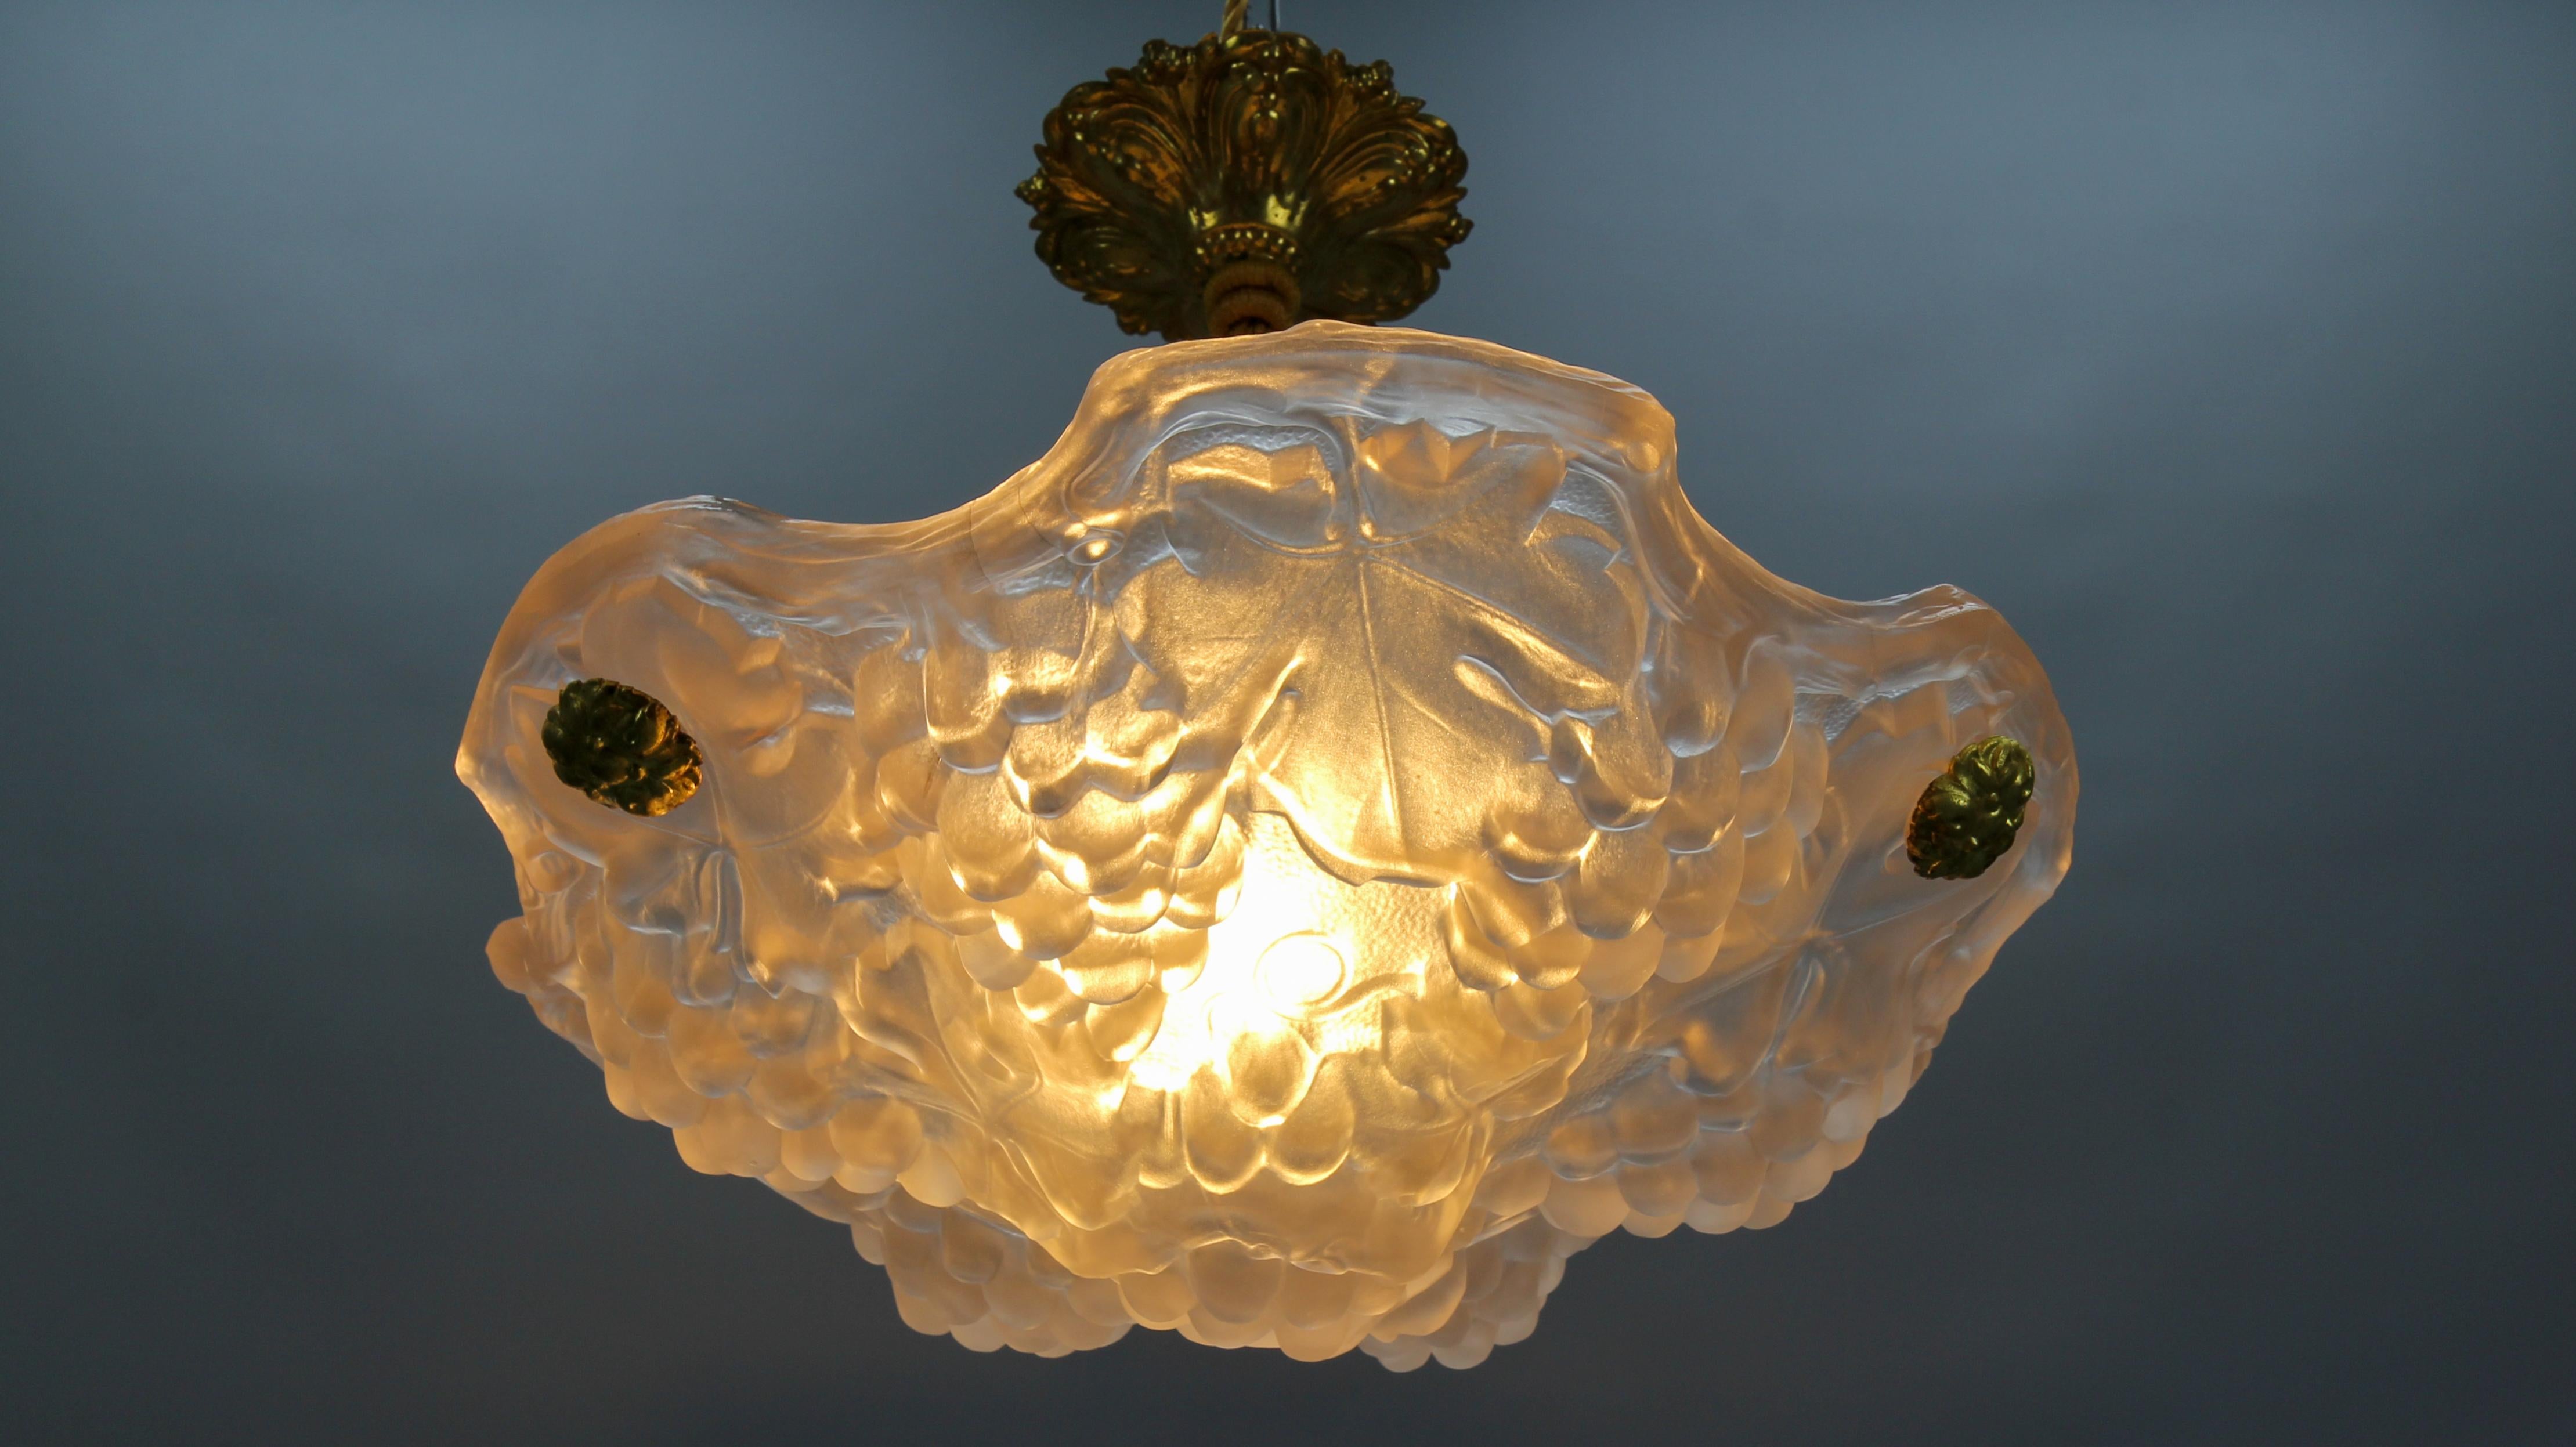 French Light Pink Frosted Glass Pendant Light with Grapes Vines by Verdun, 1930s For Sale 5